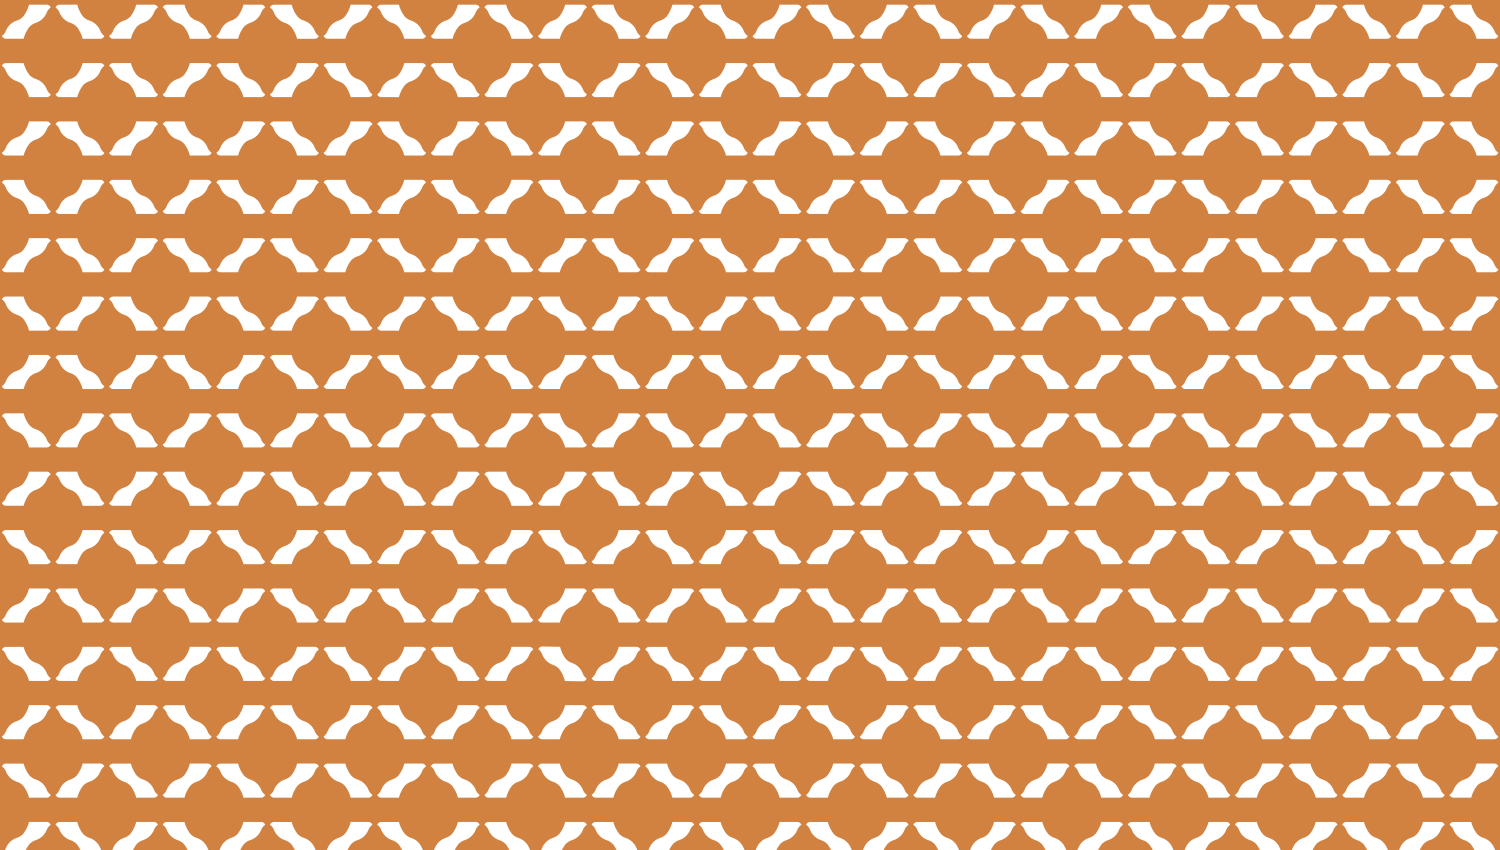 Parasoleil™ Jaipur© pattern displayed with a ochre color overlay